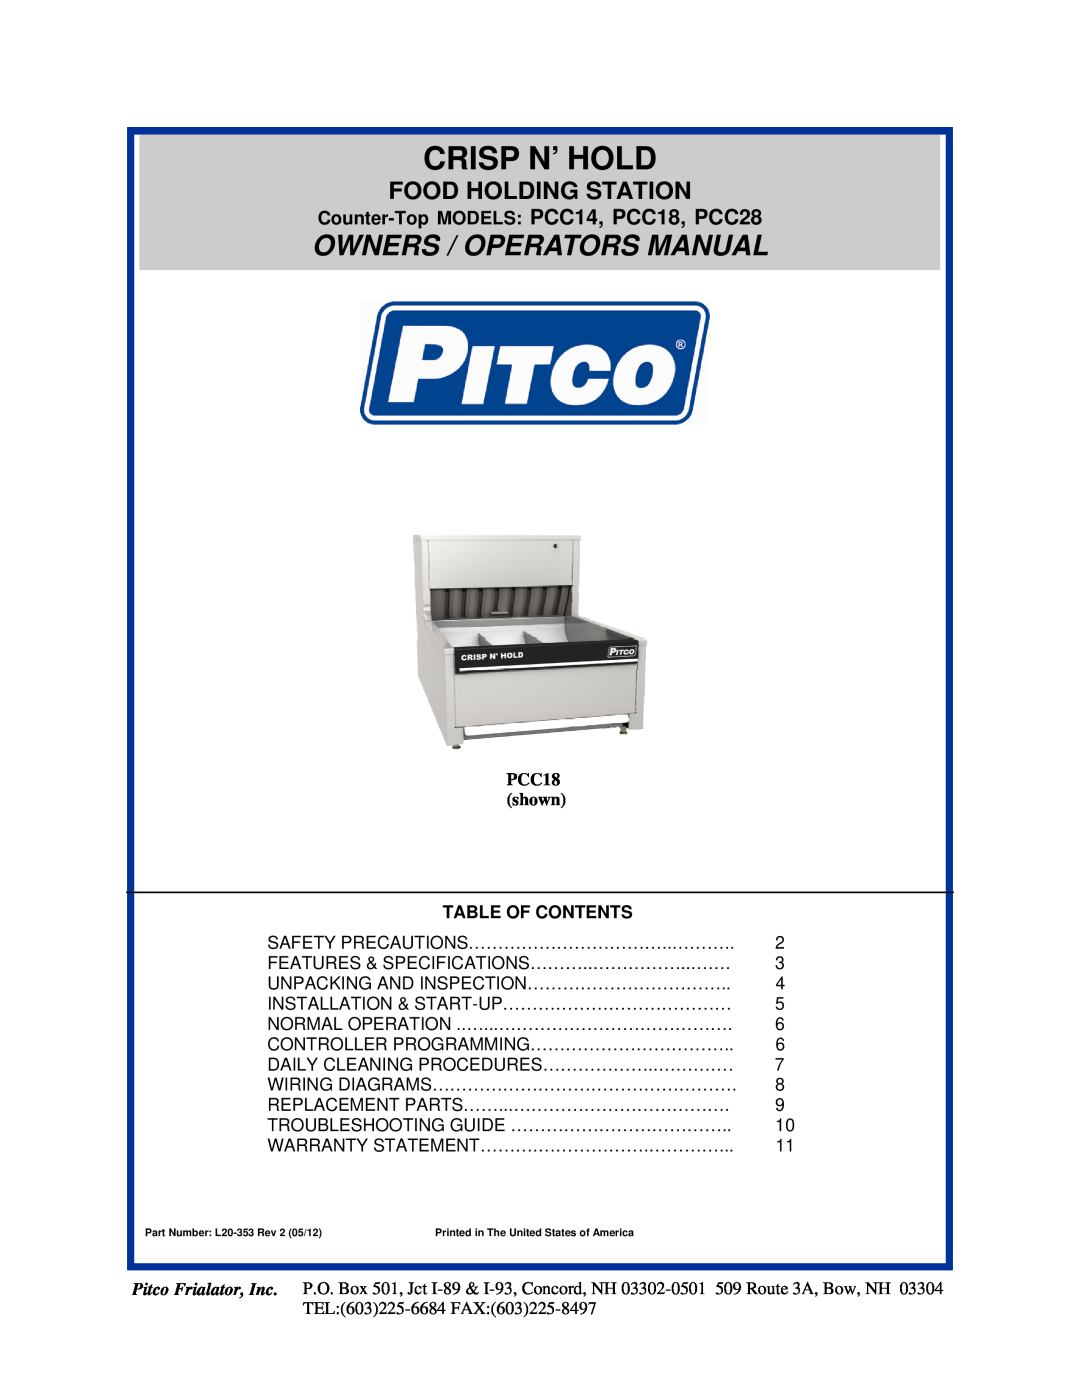 Pitco Frialator specifications Counter-Top MODELS PCC14, PCC18, PCC28, Crisp N’ Hold, Owners / Operators Manual 